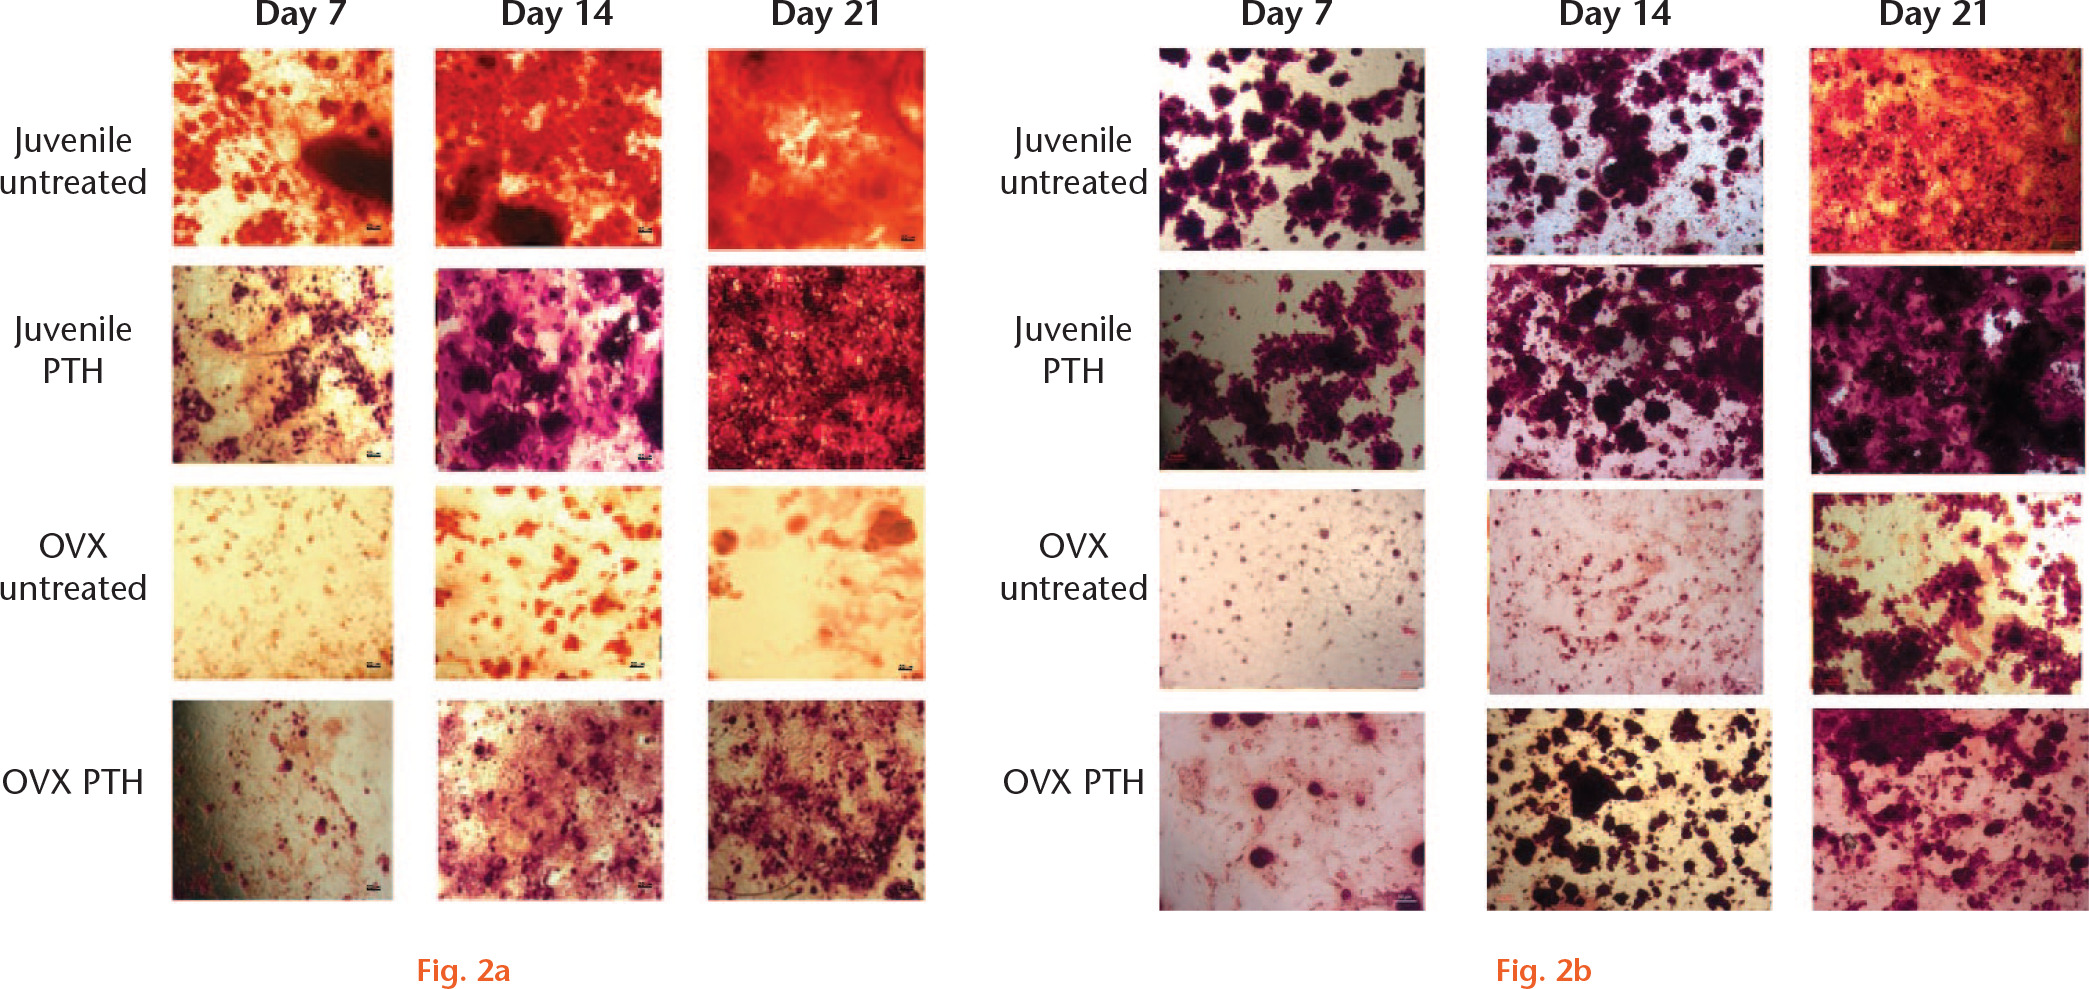 Fig. 2 
            a) Images of calcium phosphate deposition stained with alizarin red from adipose-derived cells. b) Images of calcium phosphate deposition stained with alizarin red from bone-marrow-derived cells. PTH, parathyroid hormone; OVX, ovarectomized.
          